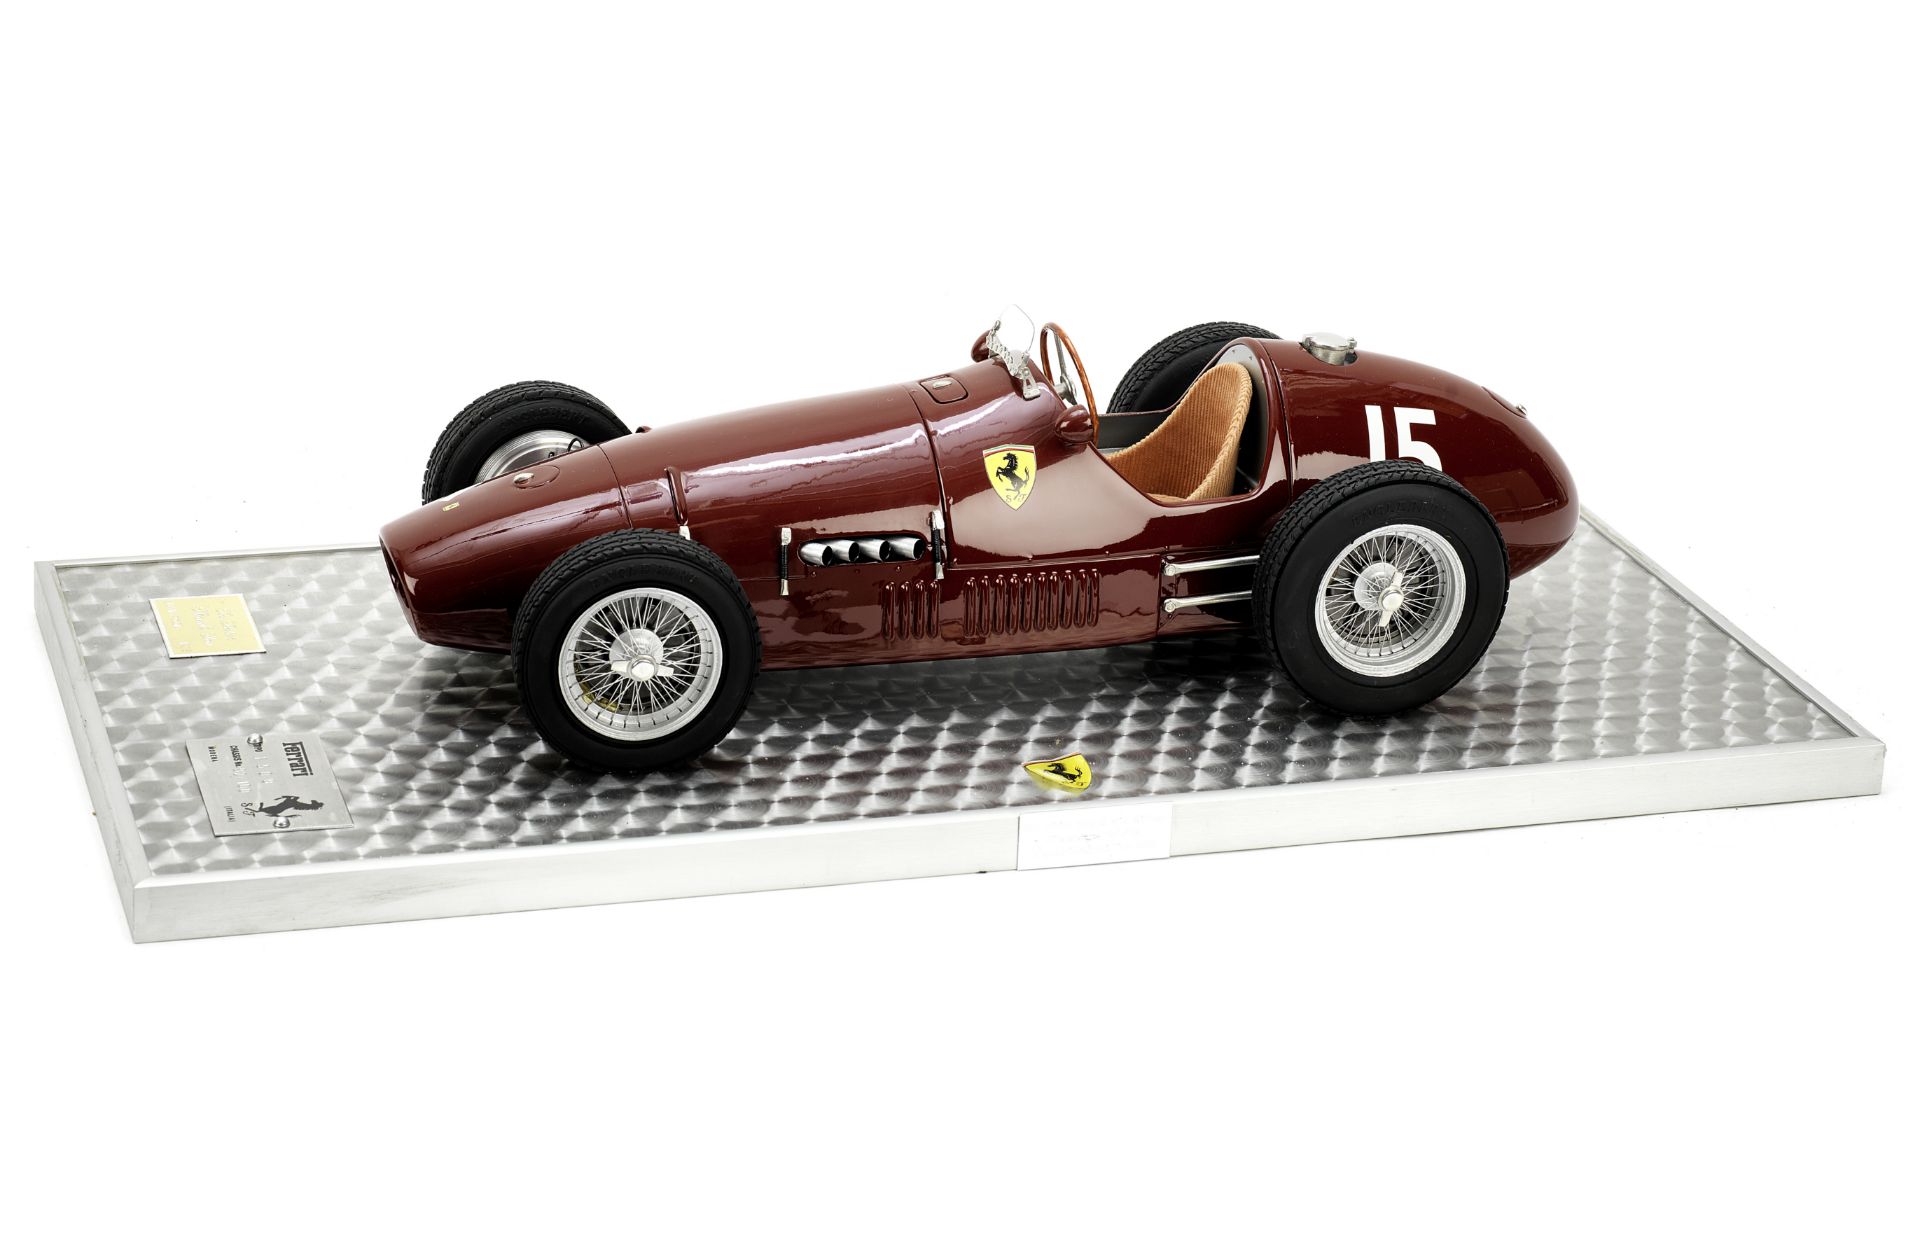 A 1:8 scale model of the 1952 Ferrari F500 by Presentation Models Of Cheshunt, Herts,